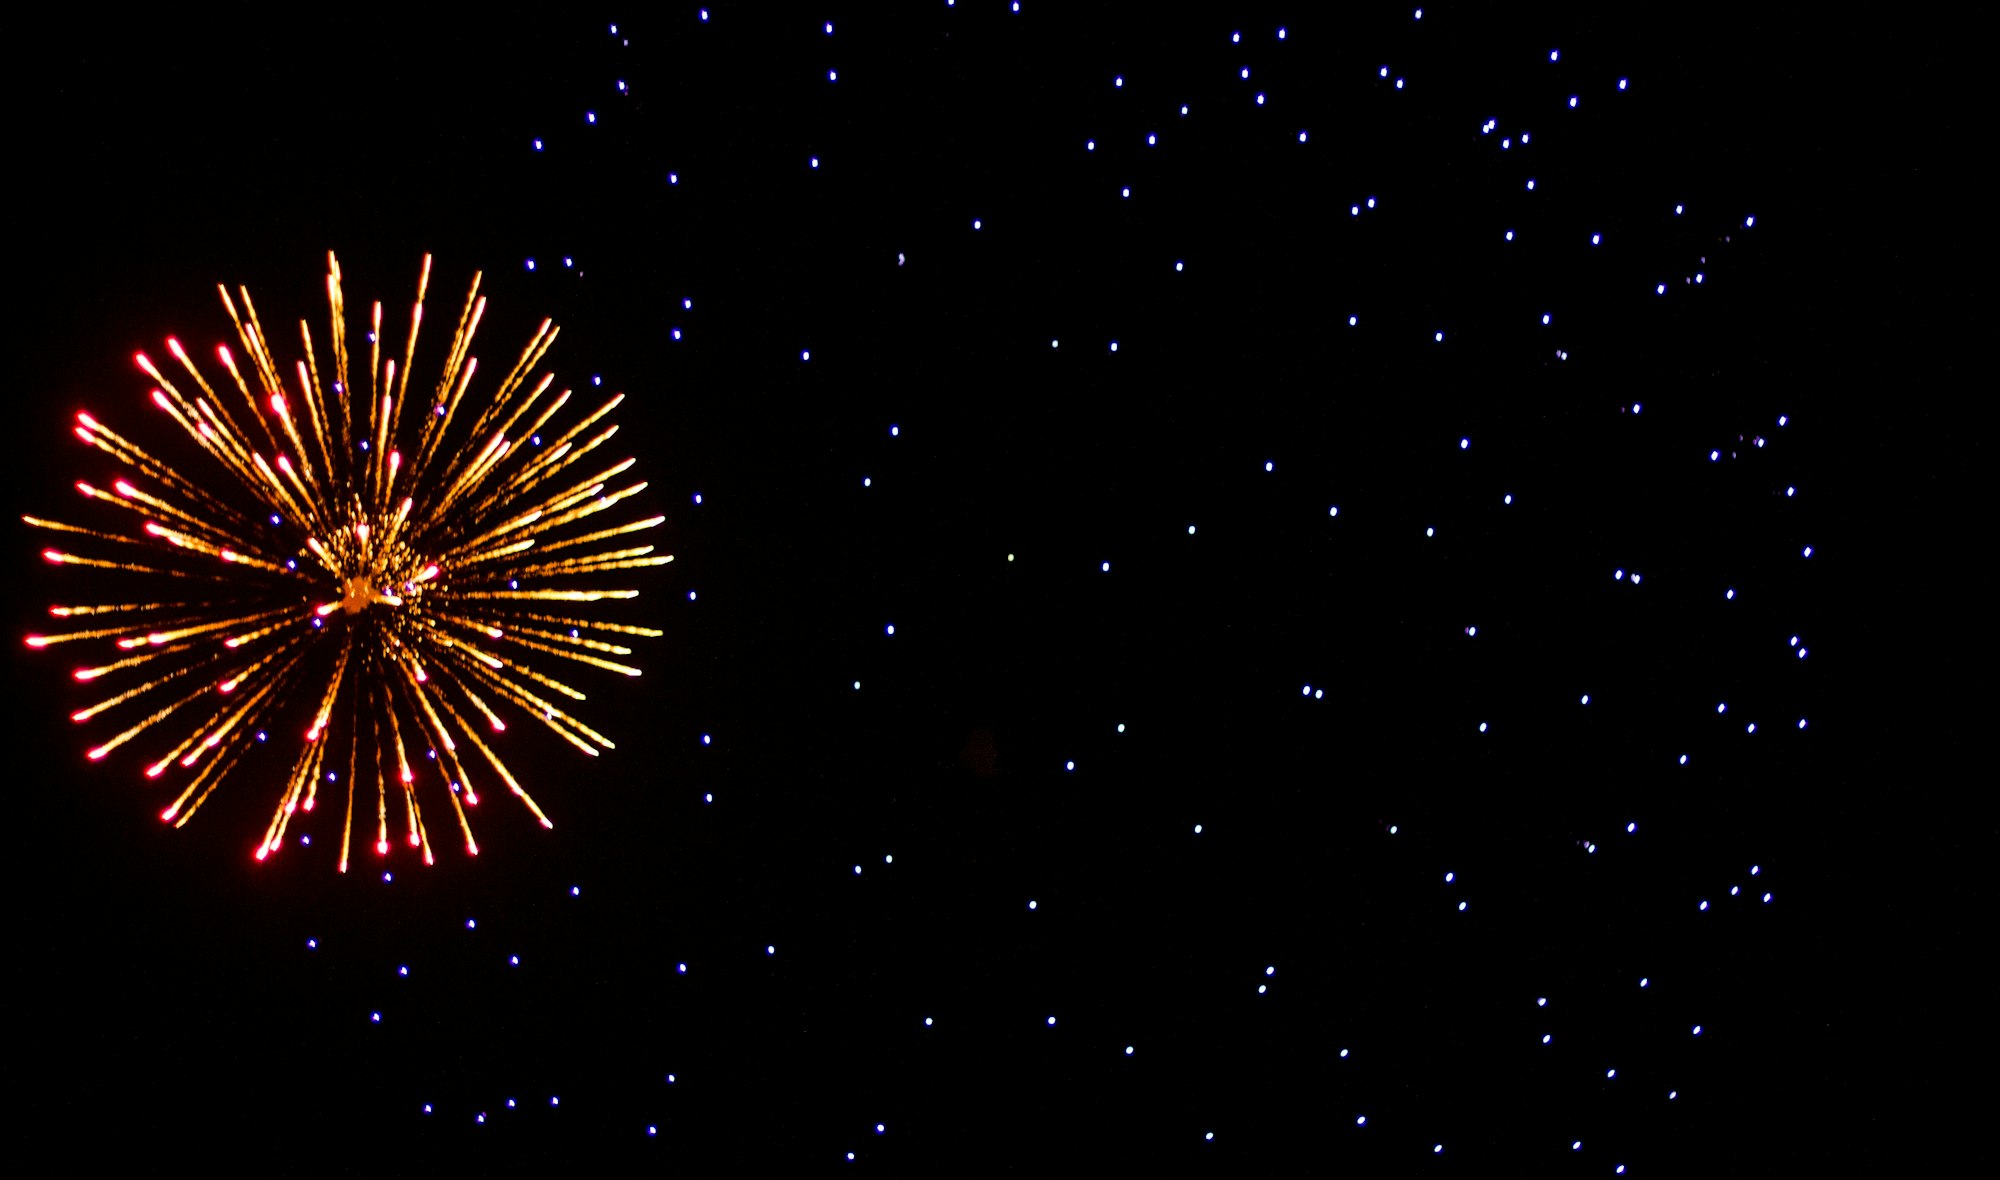 NYE Fireworks! I will love you if you buy me a donut for this picture: ko-fi.com/bramnaus :)